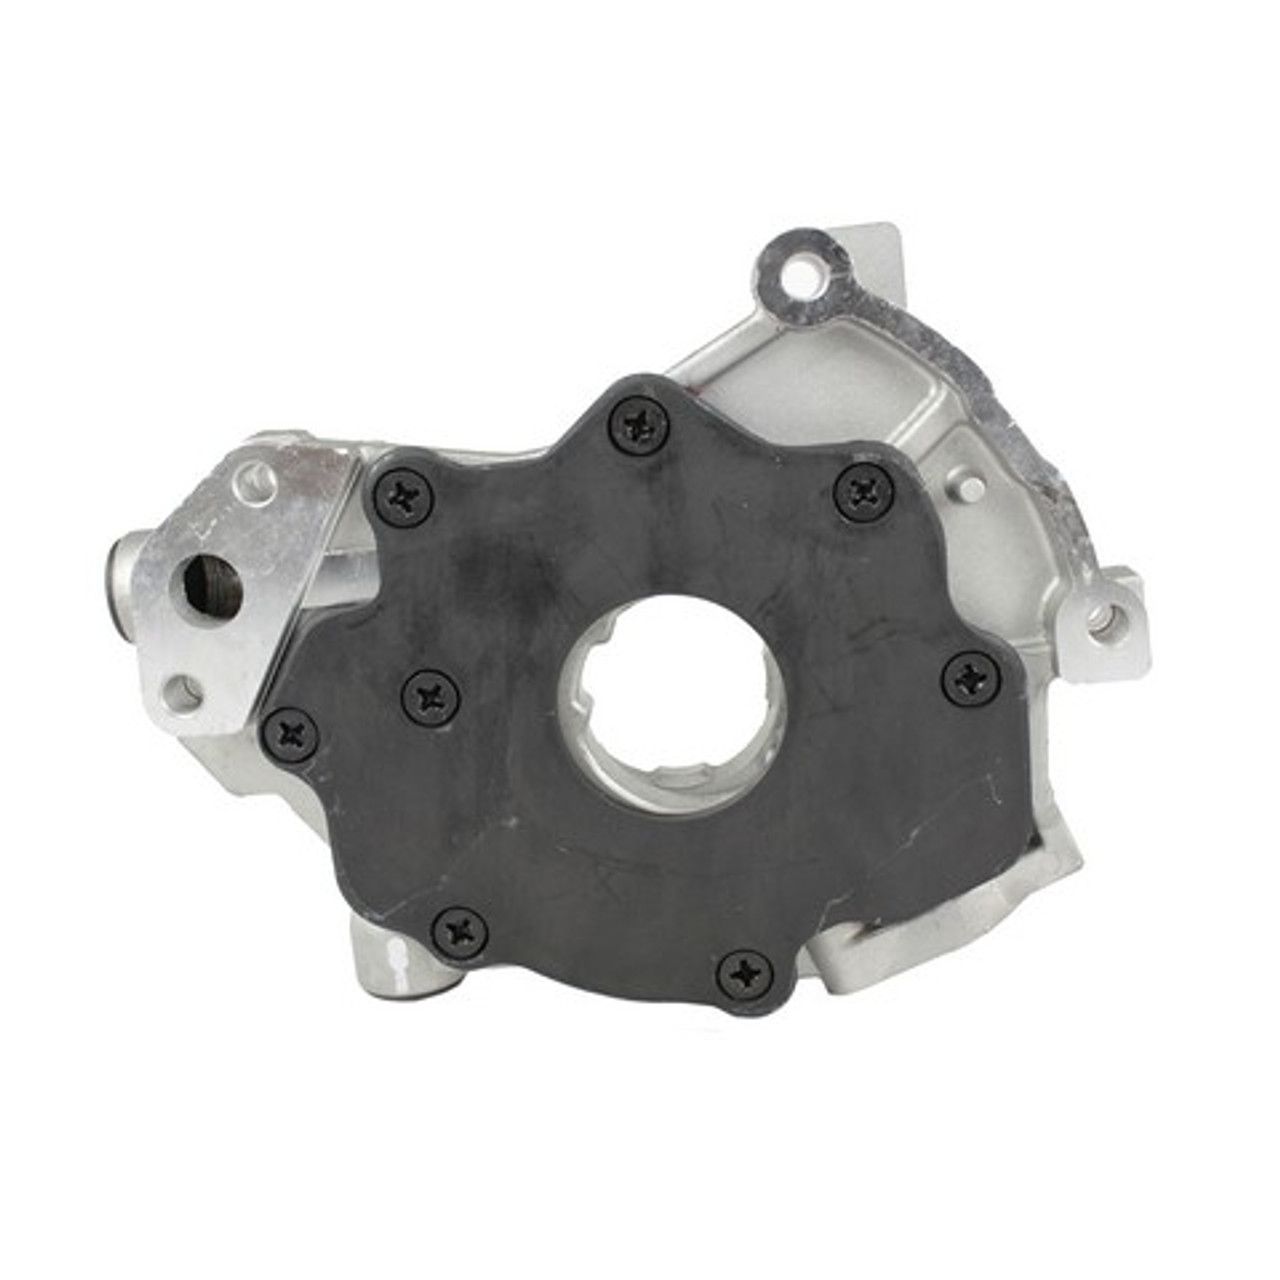 Oil Pump 5.4L 1997 Ford Expedition - OP4131.183